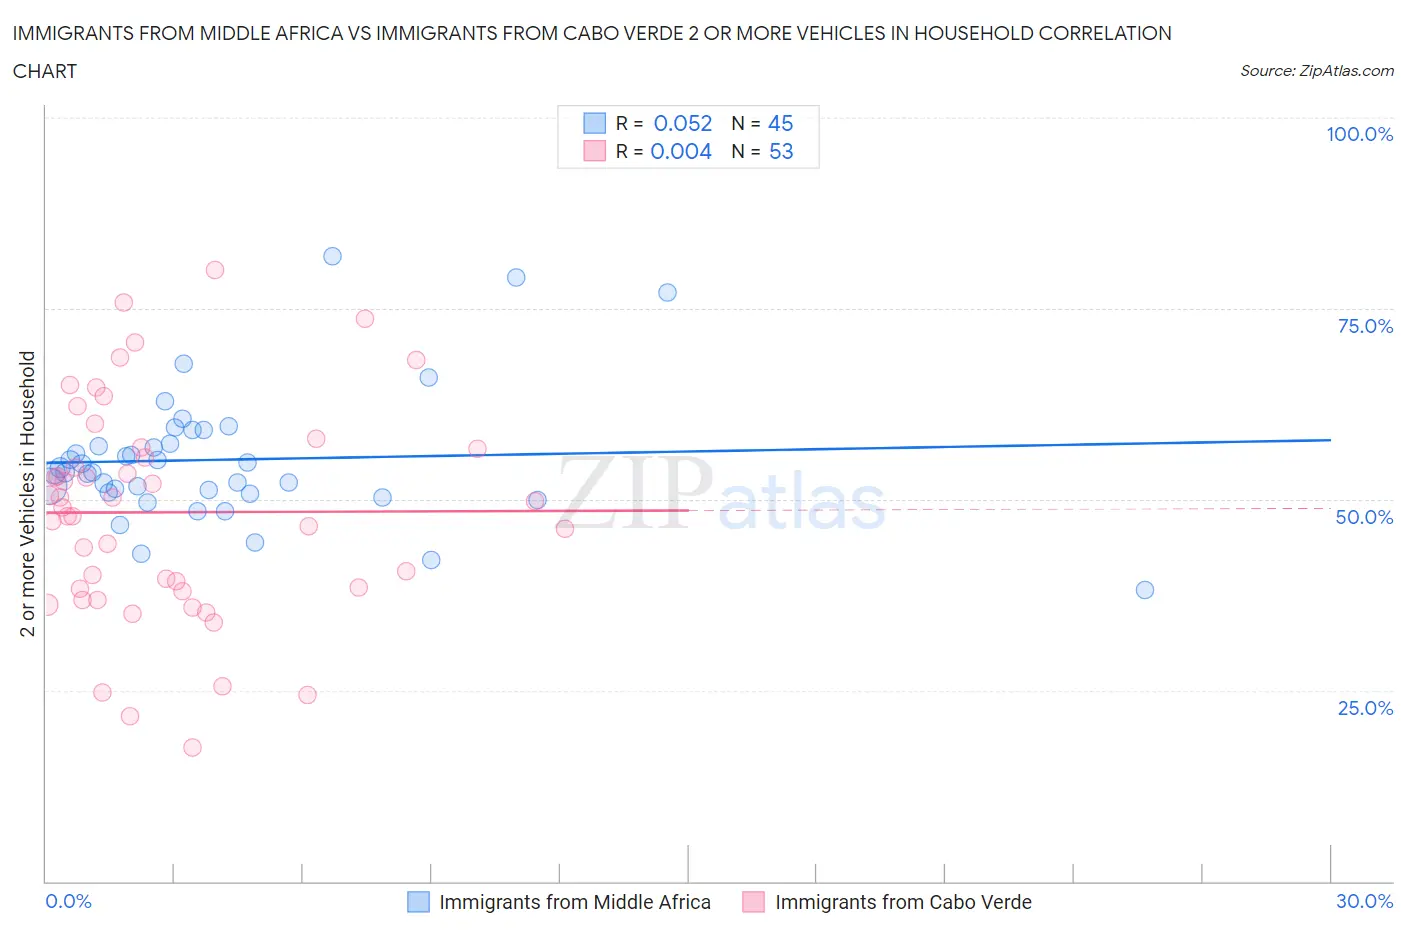 Immigrants from Middle Africa vs Immigrants from Cabo Verde 2 or more Vehicles in Household